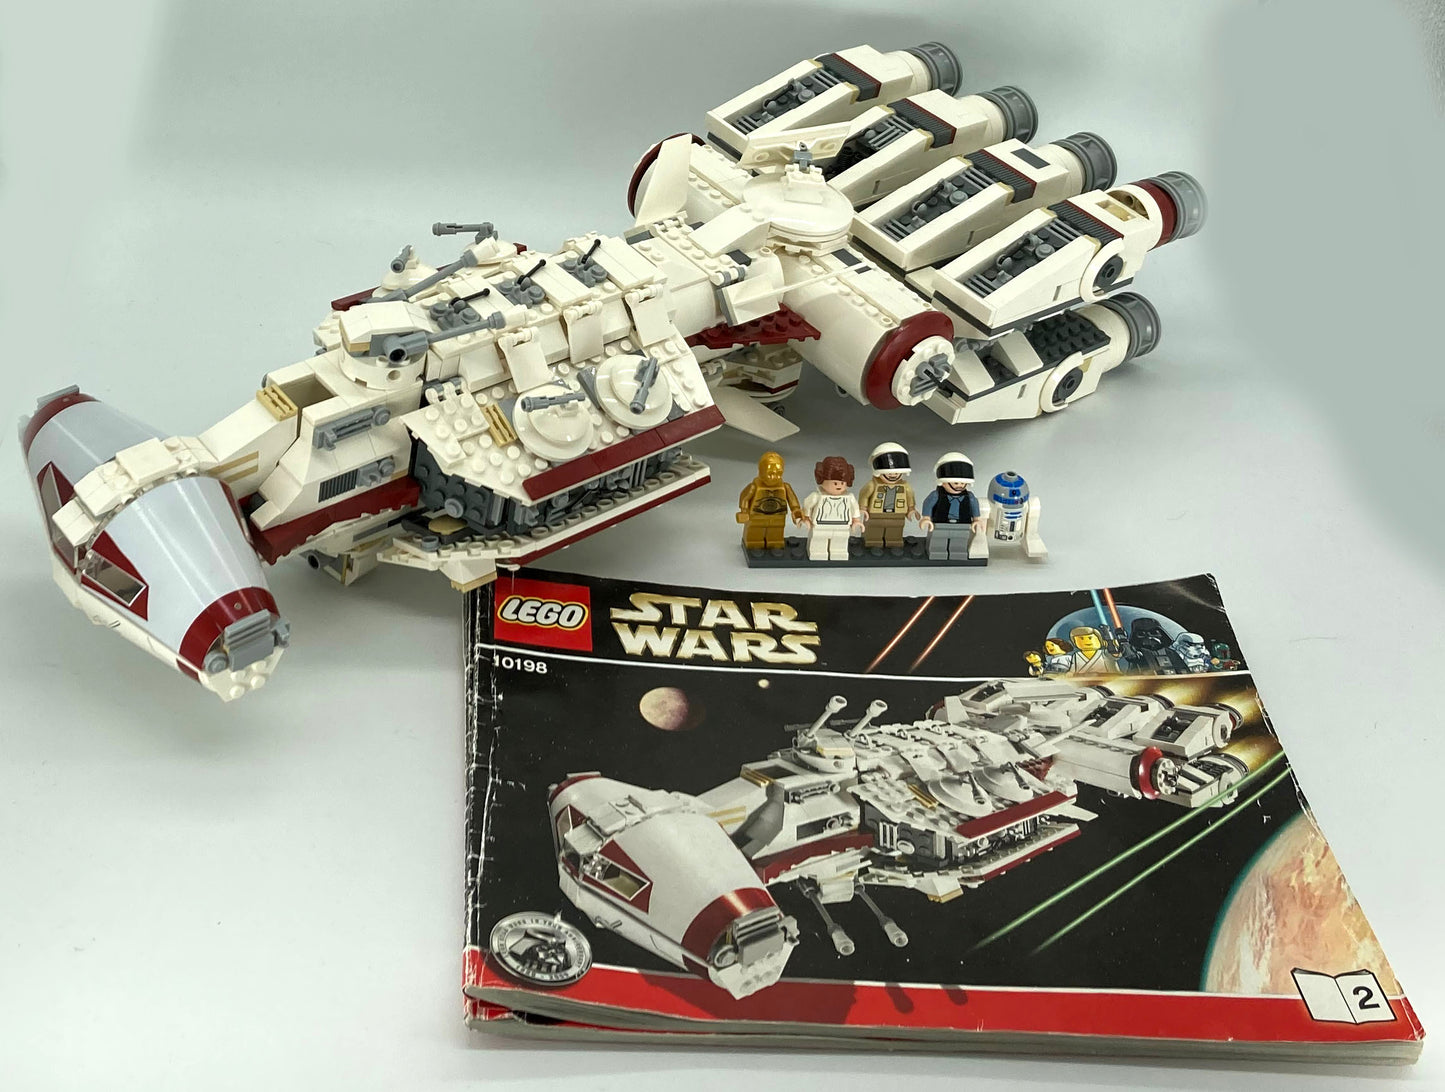 Used Set 10198 Tantive IV (with Instruction Manuals, No Box)